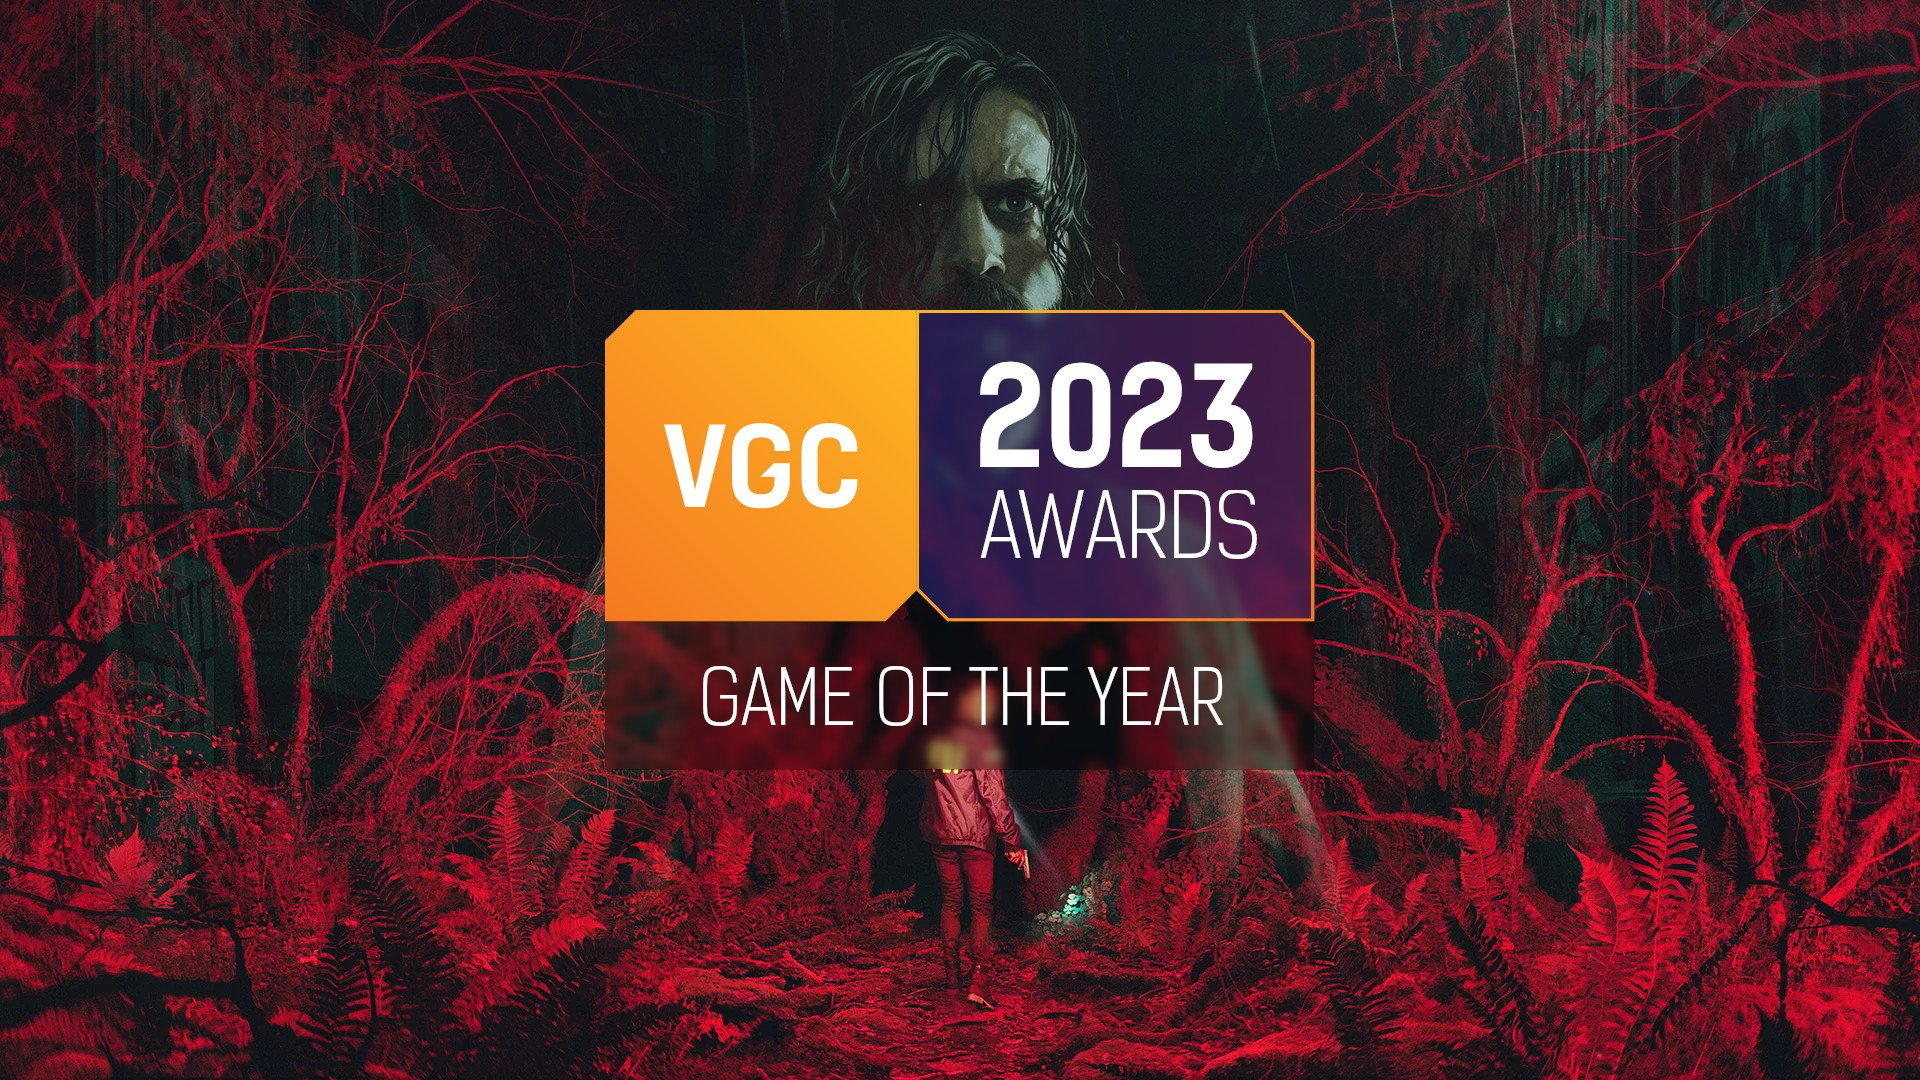 VGC's Game of the Year 2023 is Alan Wake 2